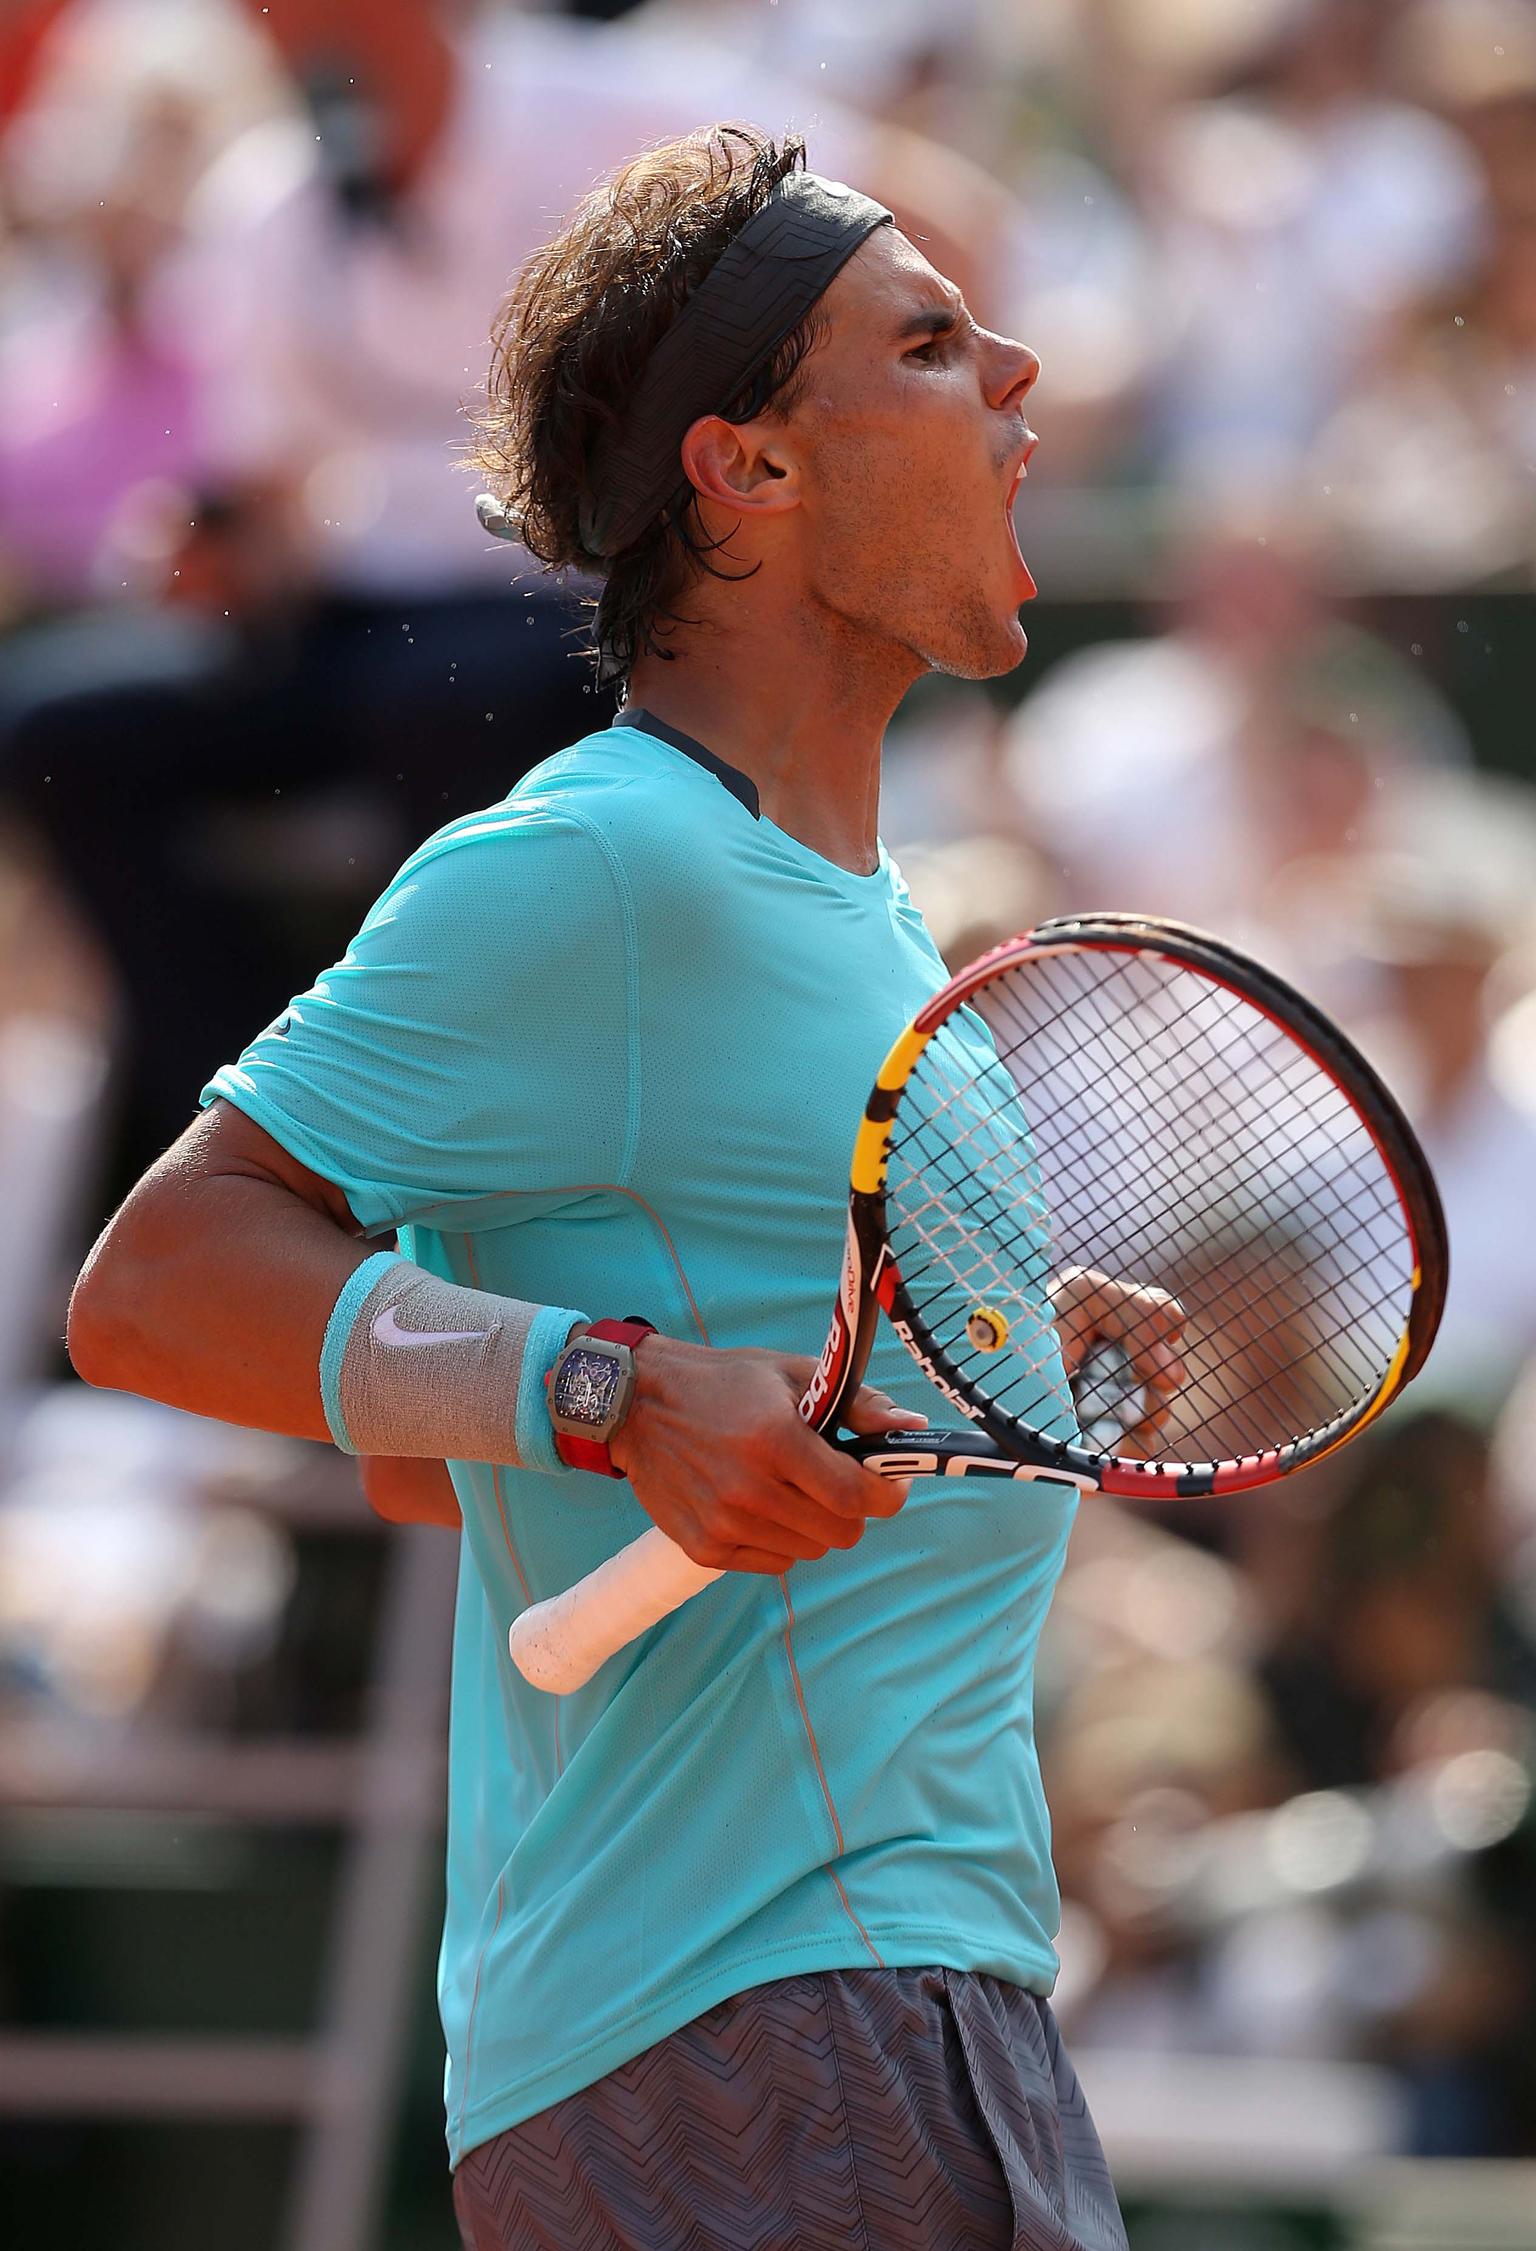 Spanish tennis star and two-time Wimbledon champion Rafa Nadal wearing the previous Richard Mille watch created especially for him: the RM 27-02 Tourbillon Rafael Nadal watch. Image: Getty